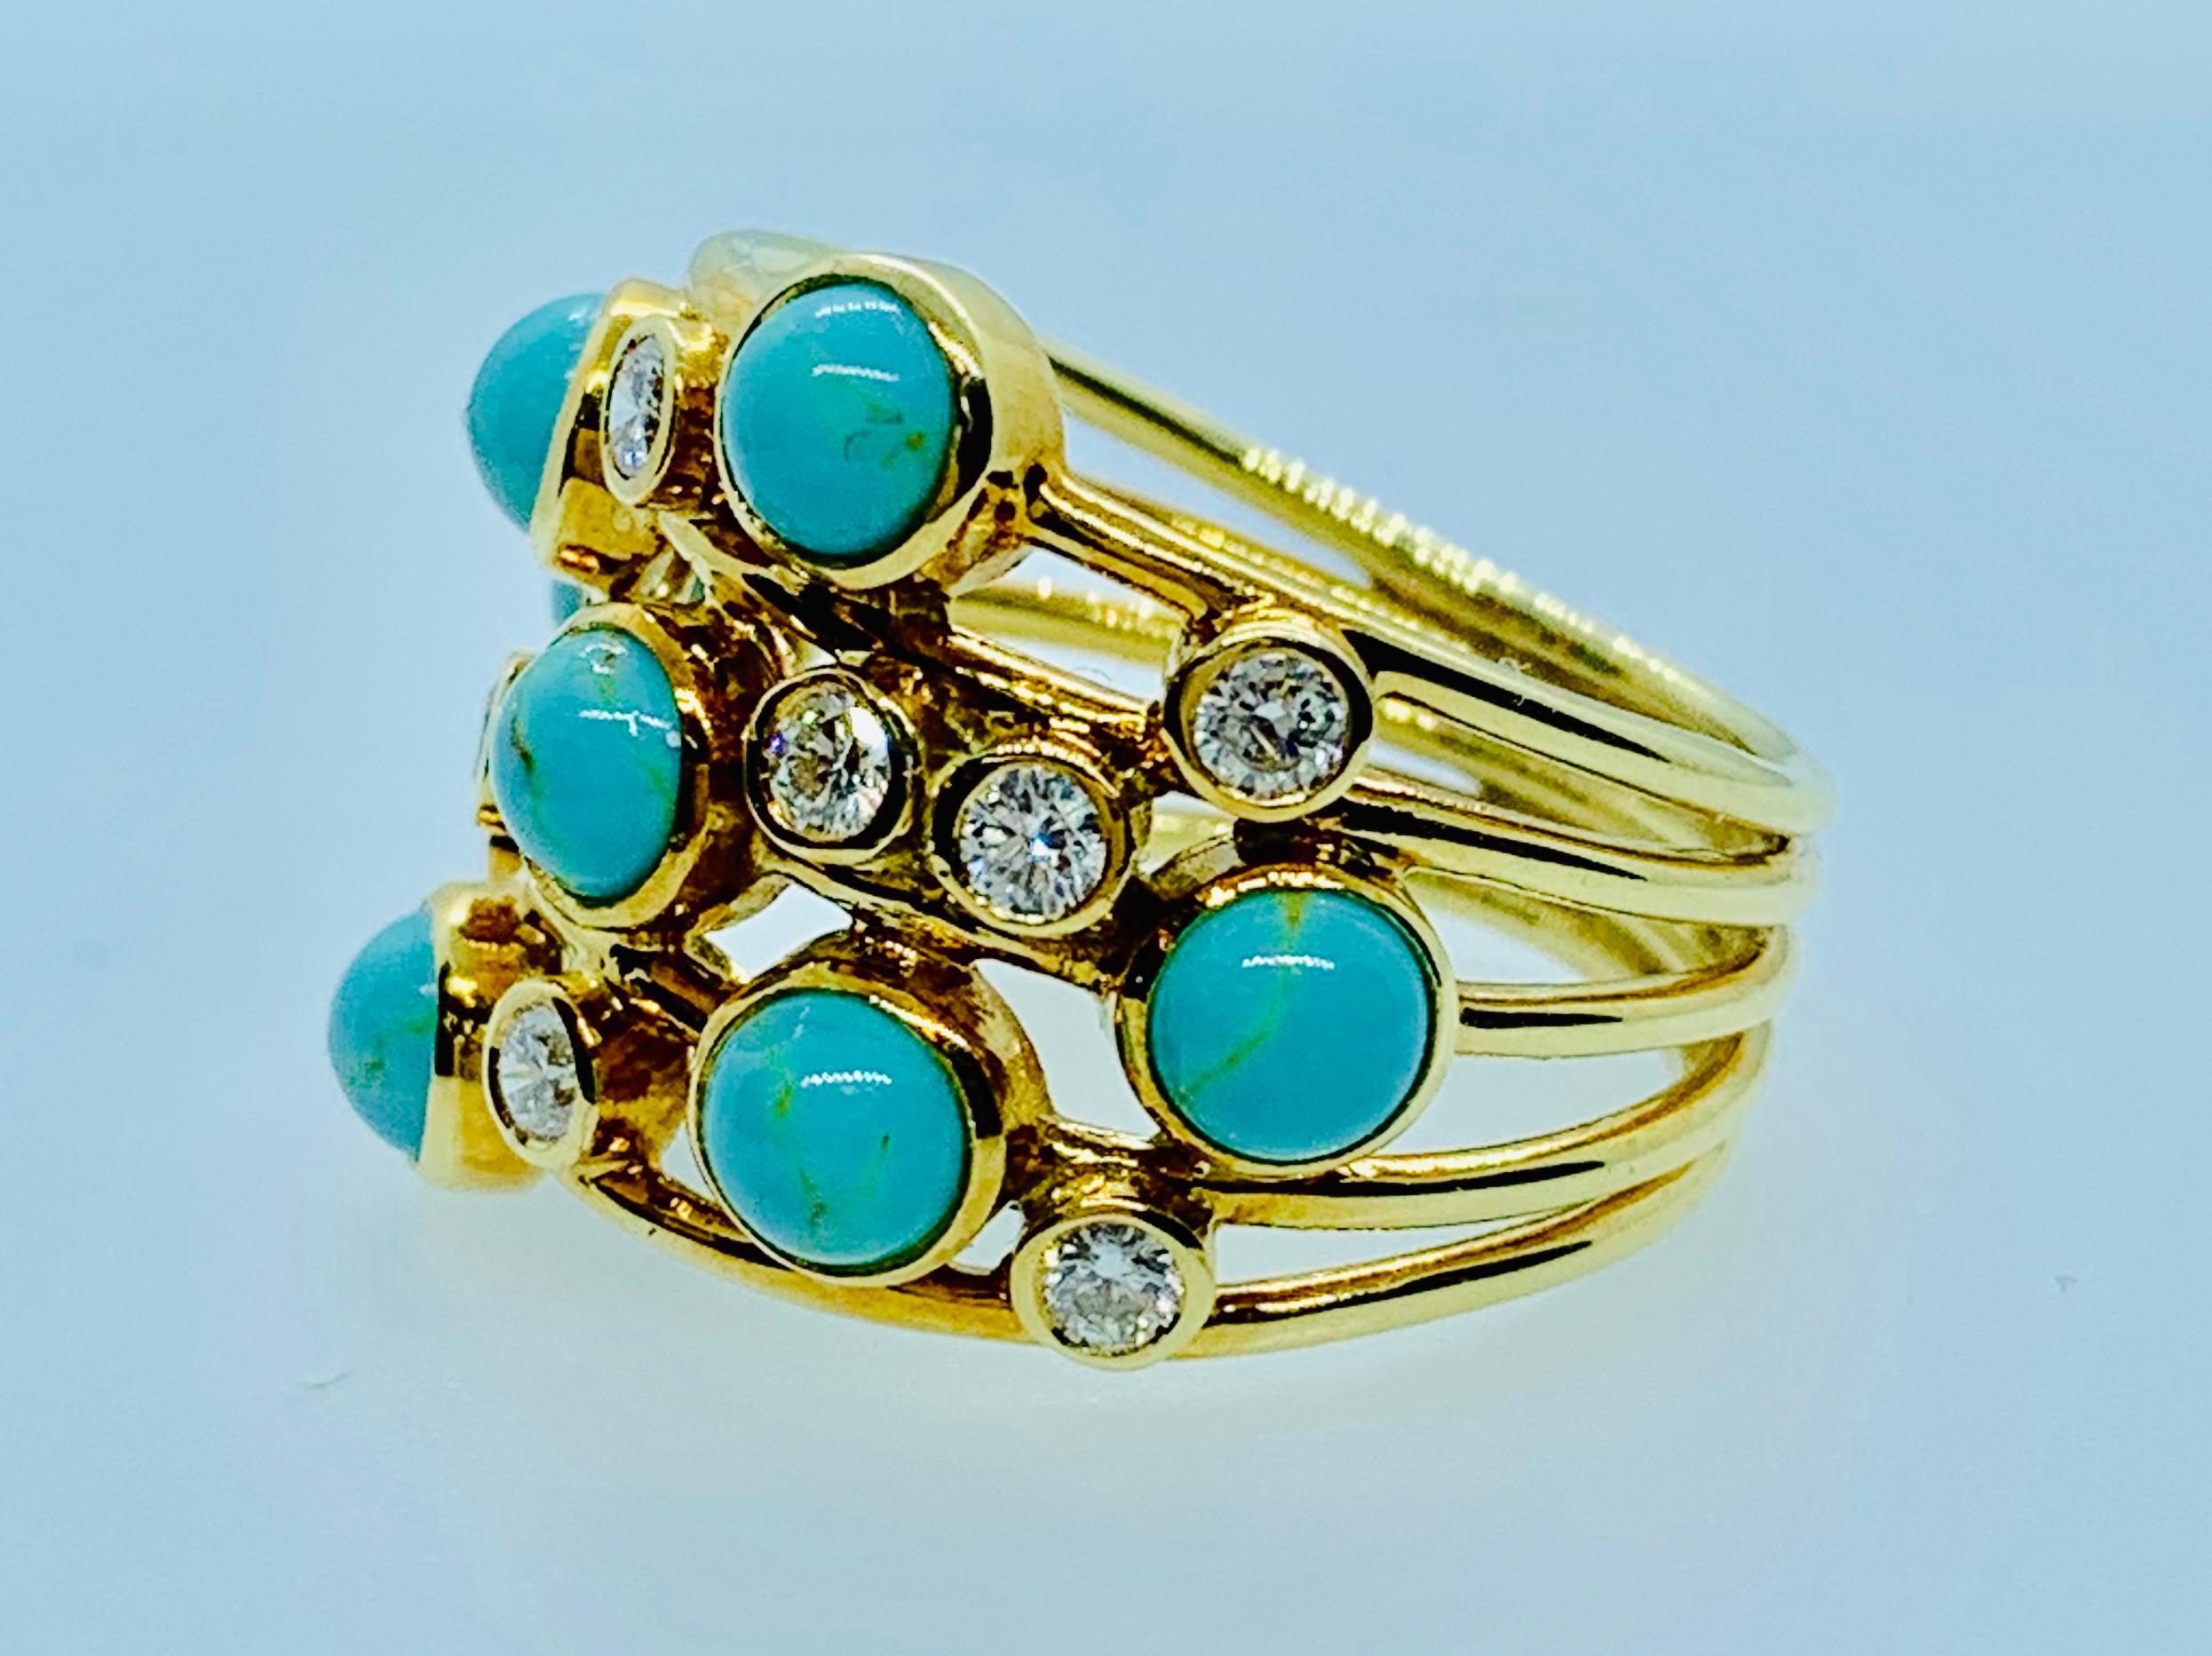 Gorgeous Ippolita Ladies Ring. This is from the Rock Candy Collection. Made in 18K yellow Gold and features gorgeous turquoise and diamond stones. There are 7 round turquoise stones and 9 brilliant diamonds. It will fit a size 6.75 to 7.0 and is 3/4